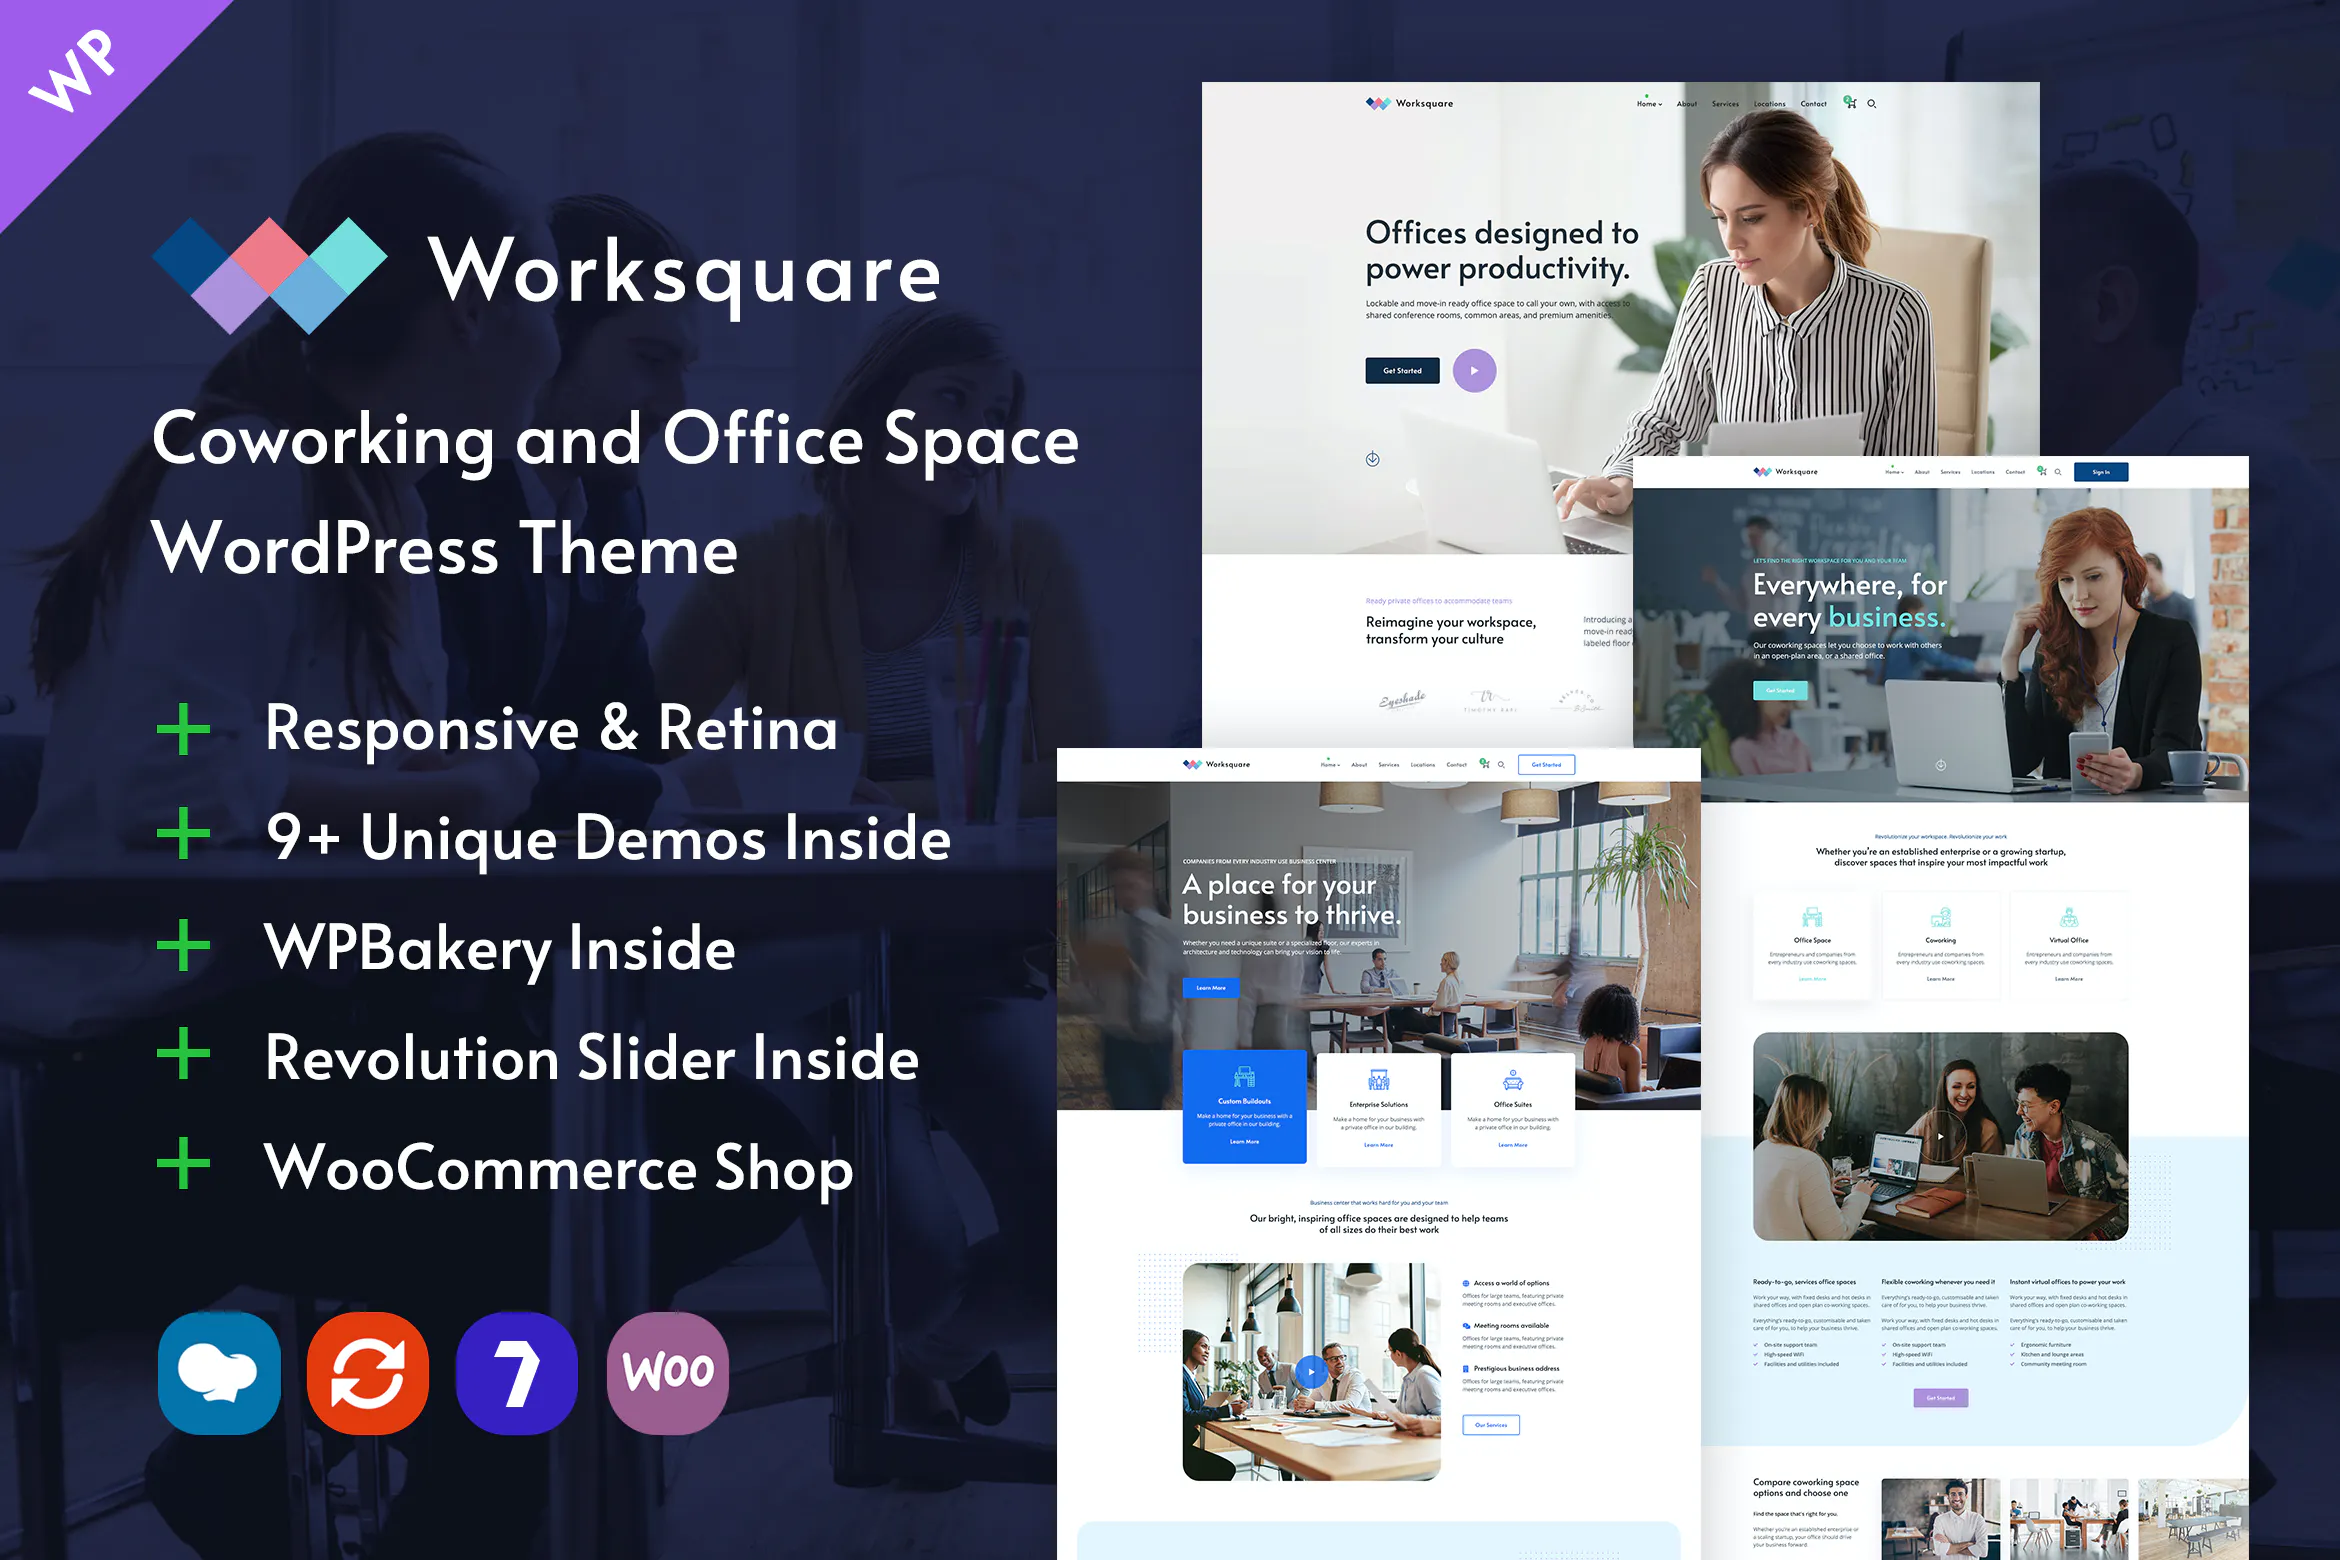 Worksquare - Coworking and Office Space WordPress插图